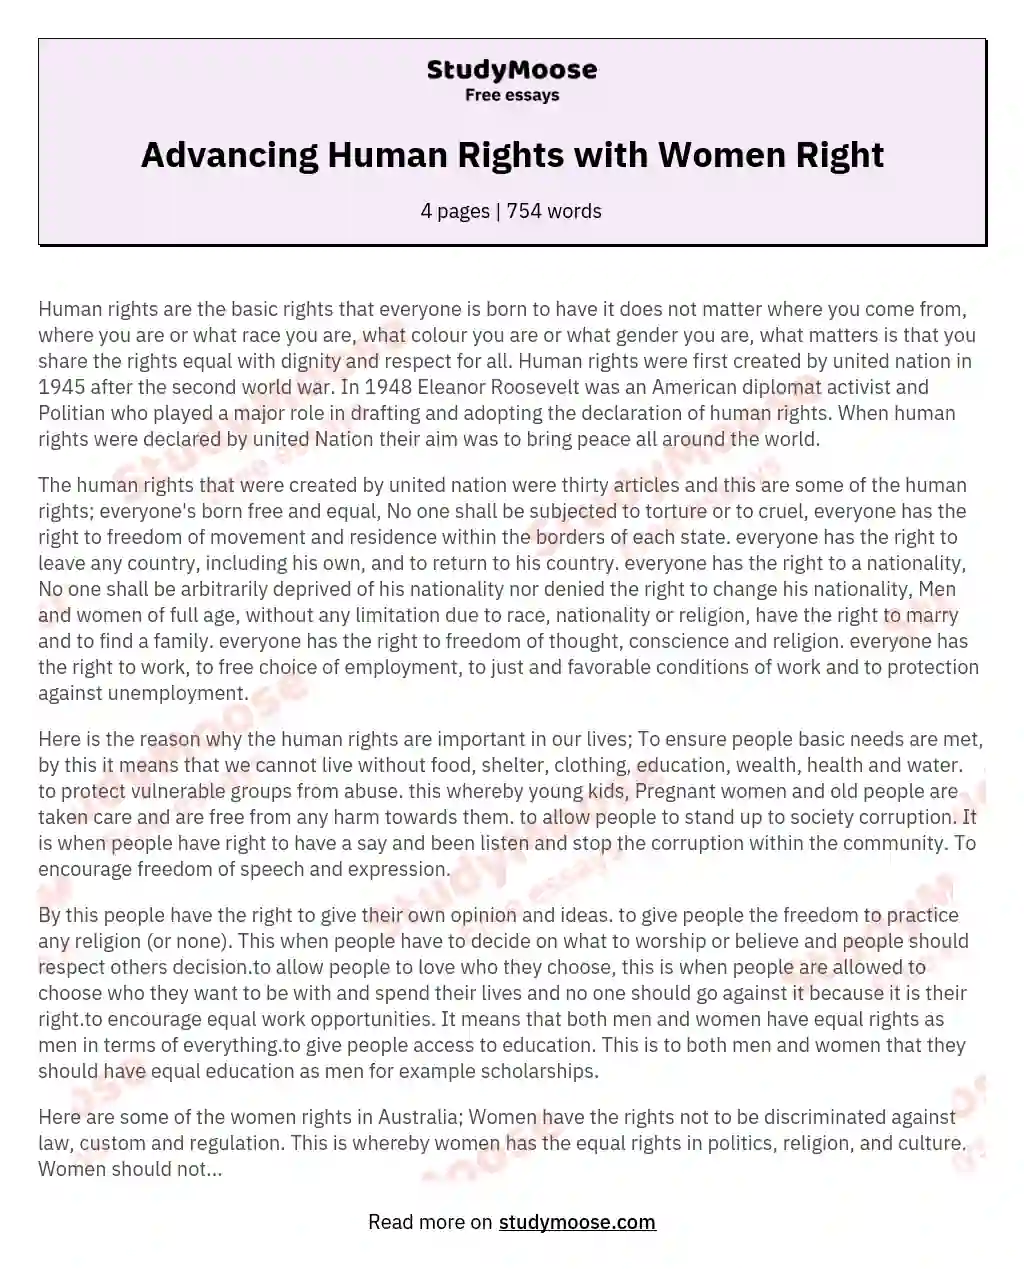 Advancing Human Rights with Women Right